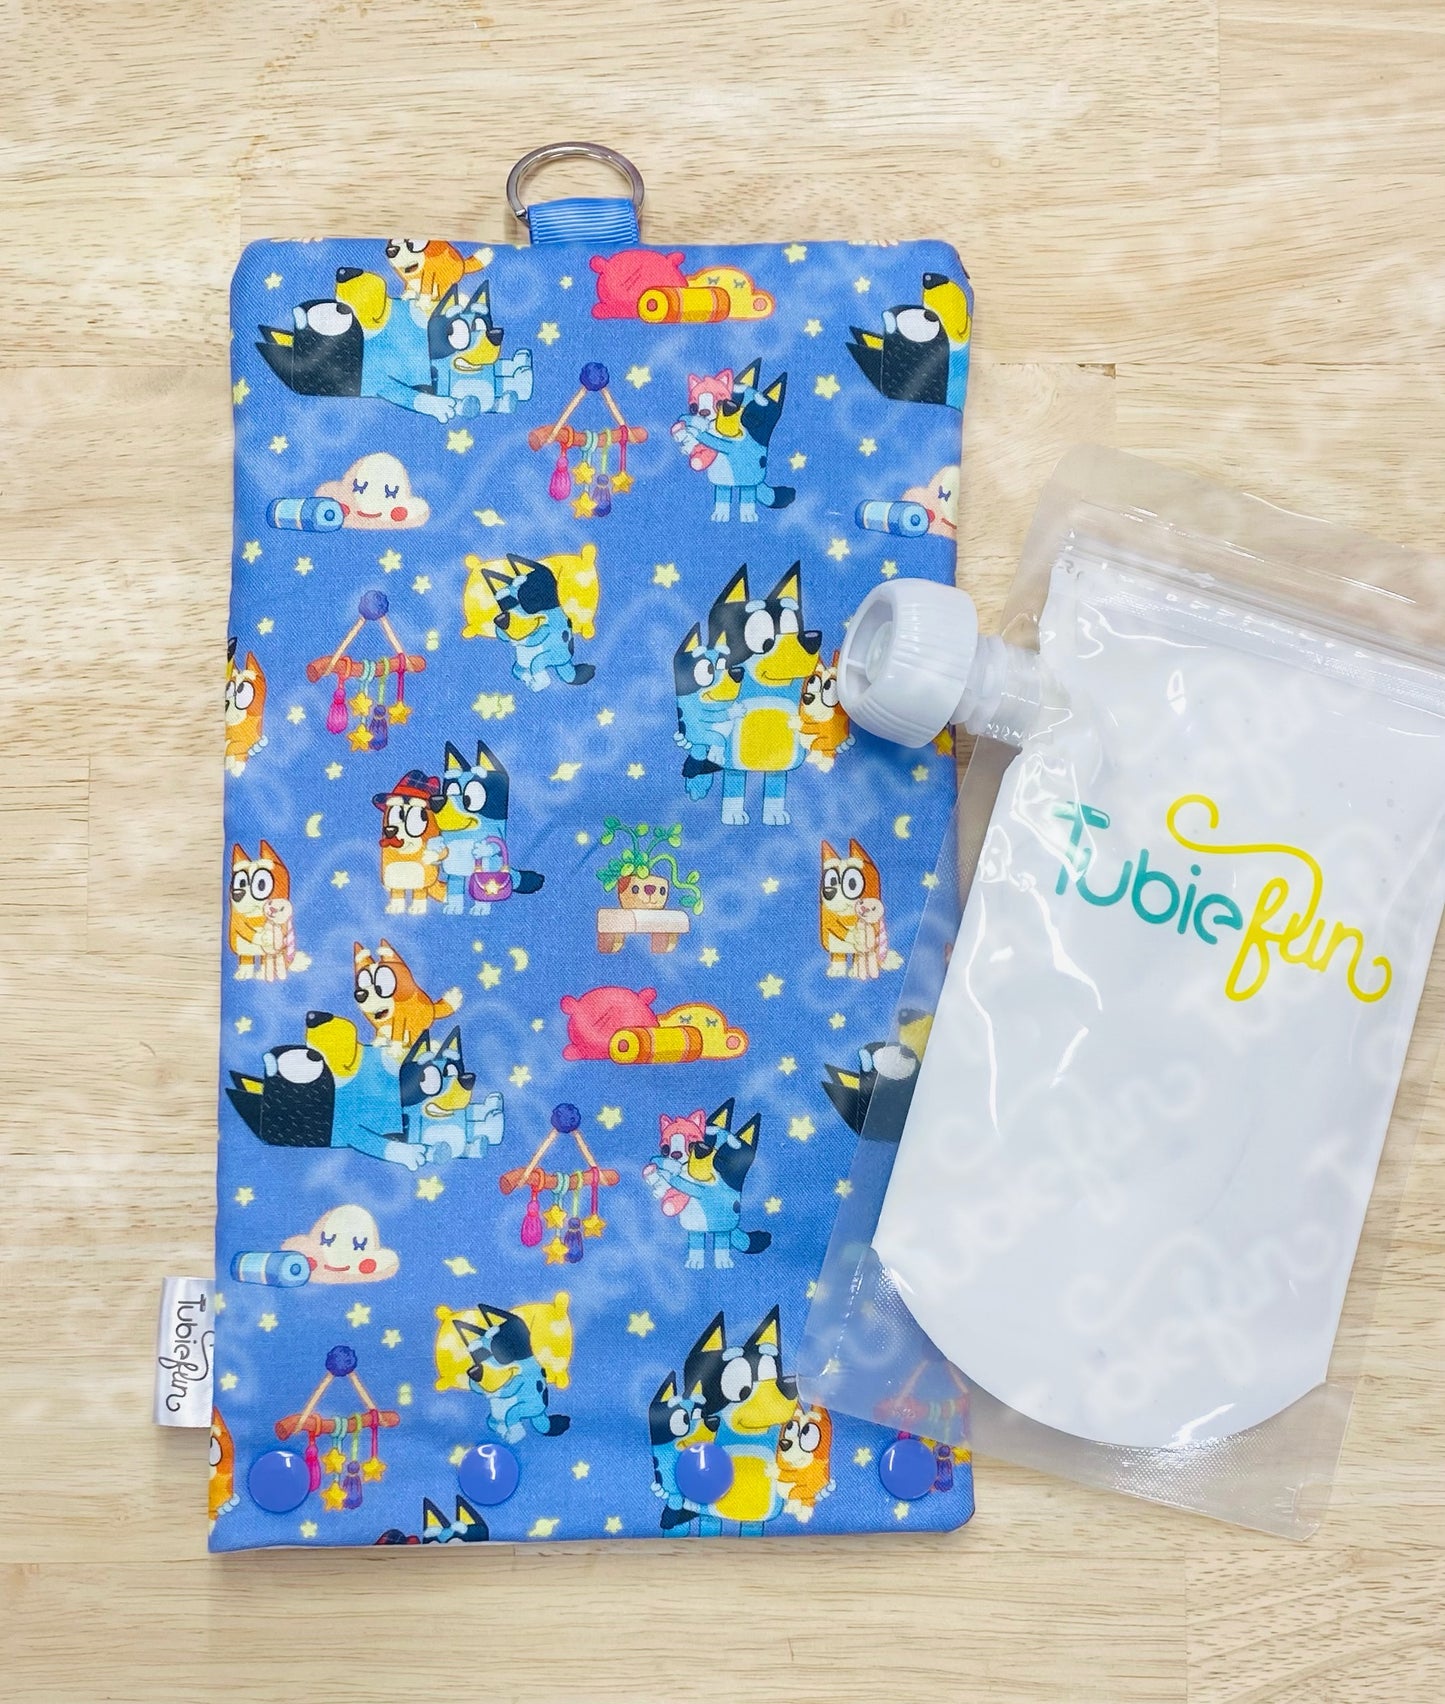 NEW Insulated Milk Bag Suitable for Tubie Fun 500ml Reusable Pouches - Aussie Dog Family